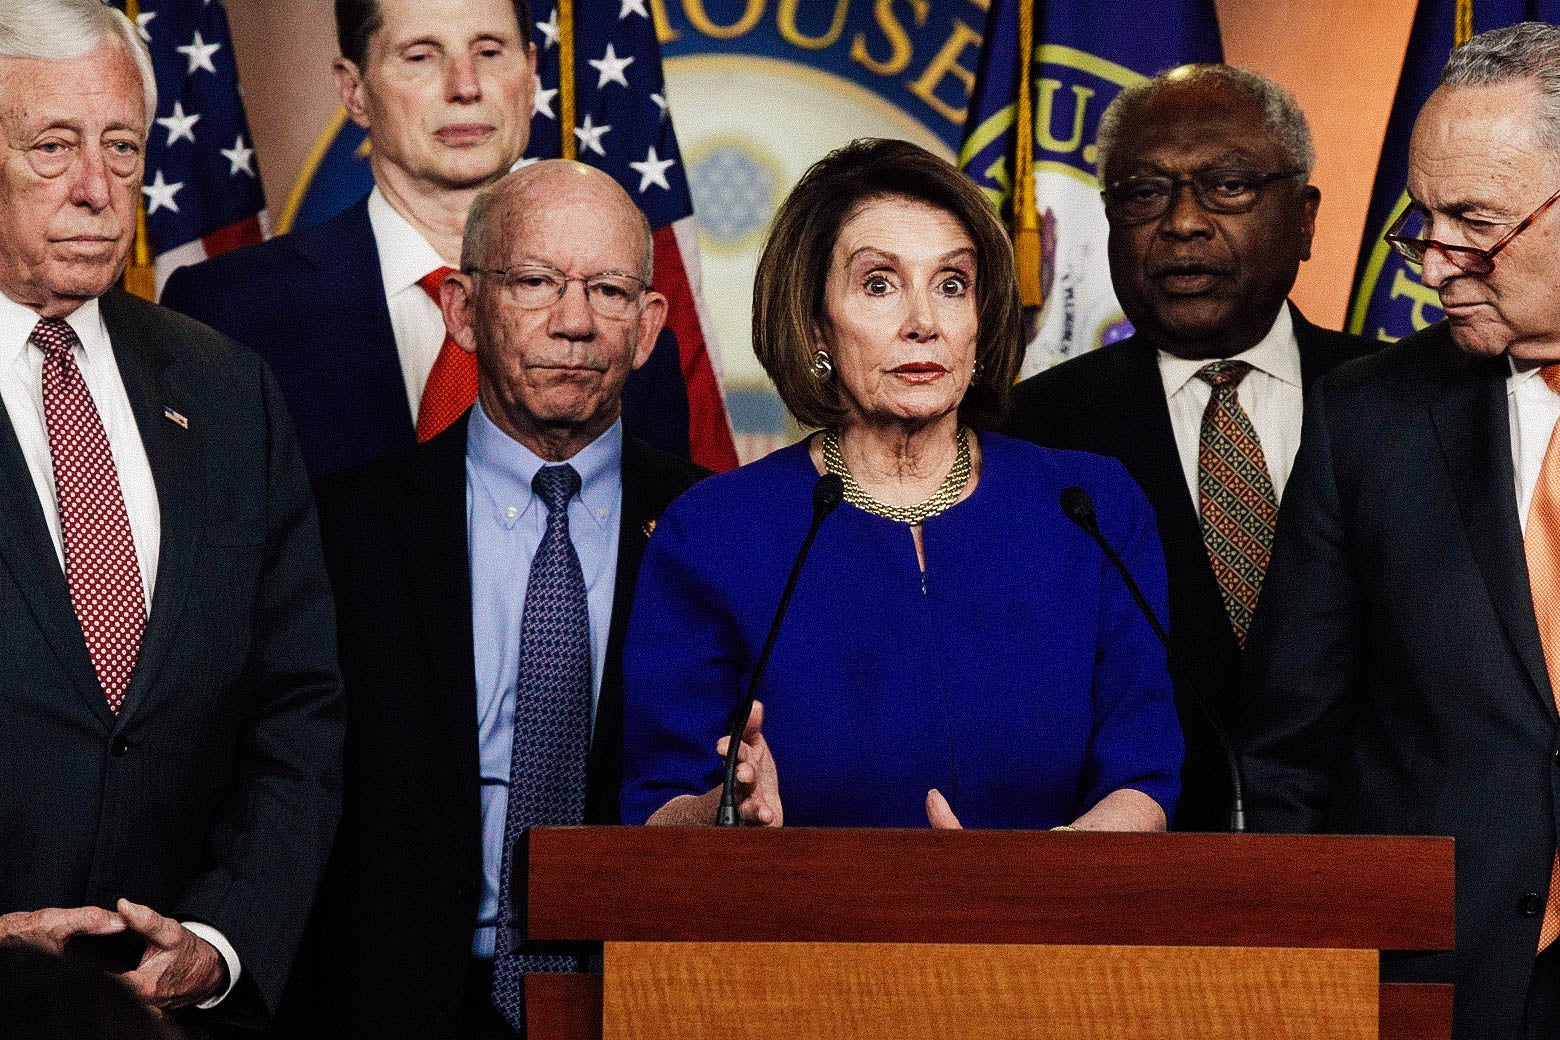 Speaker of the House Rep. Nancy Pelosi (center) speaks to the media as Senate Minority Leader Sen. Chuck Schumer and other congressional leaders listen on May 22 in Washington.